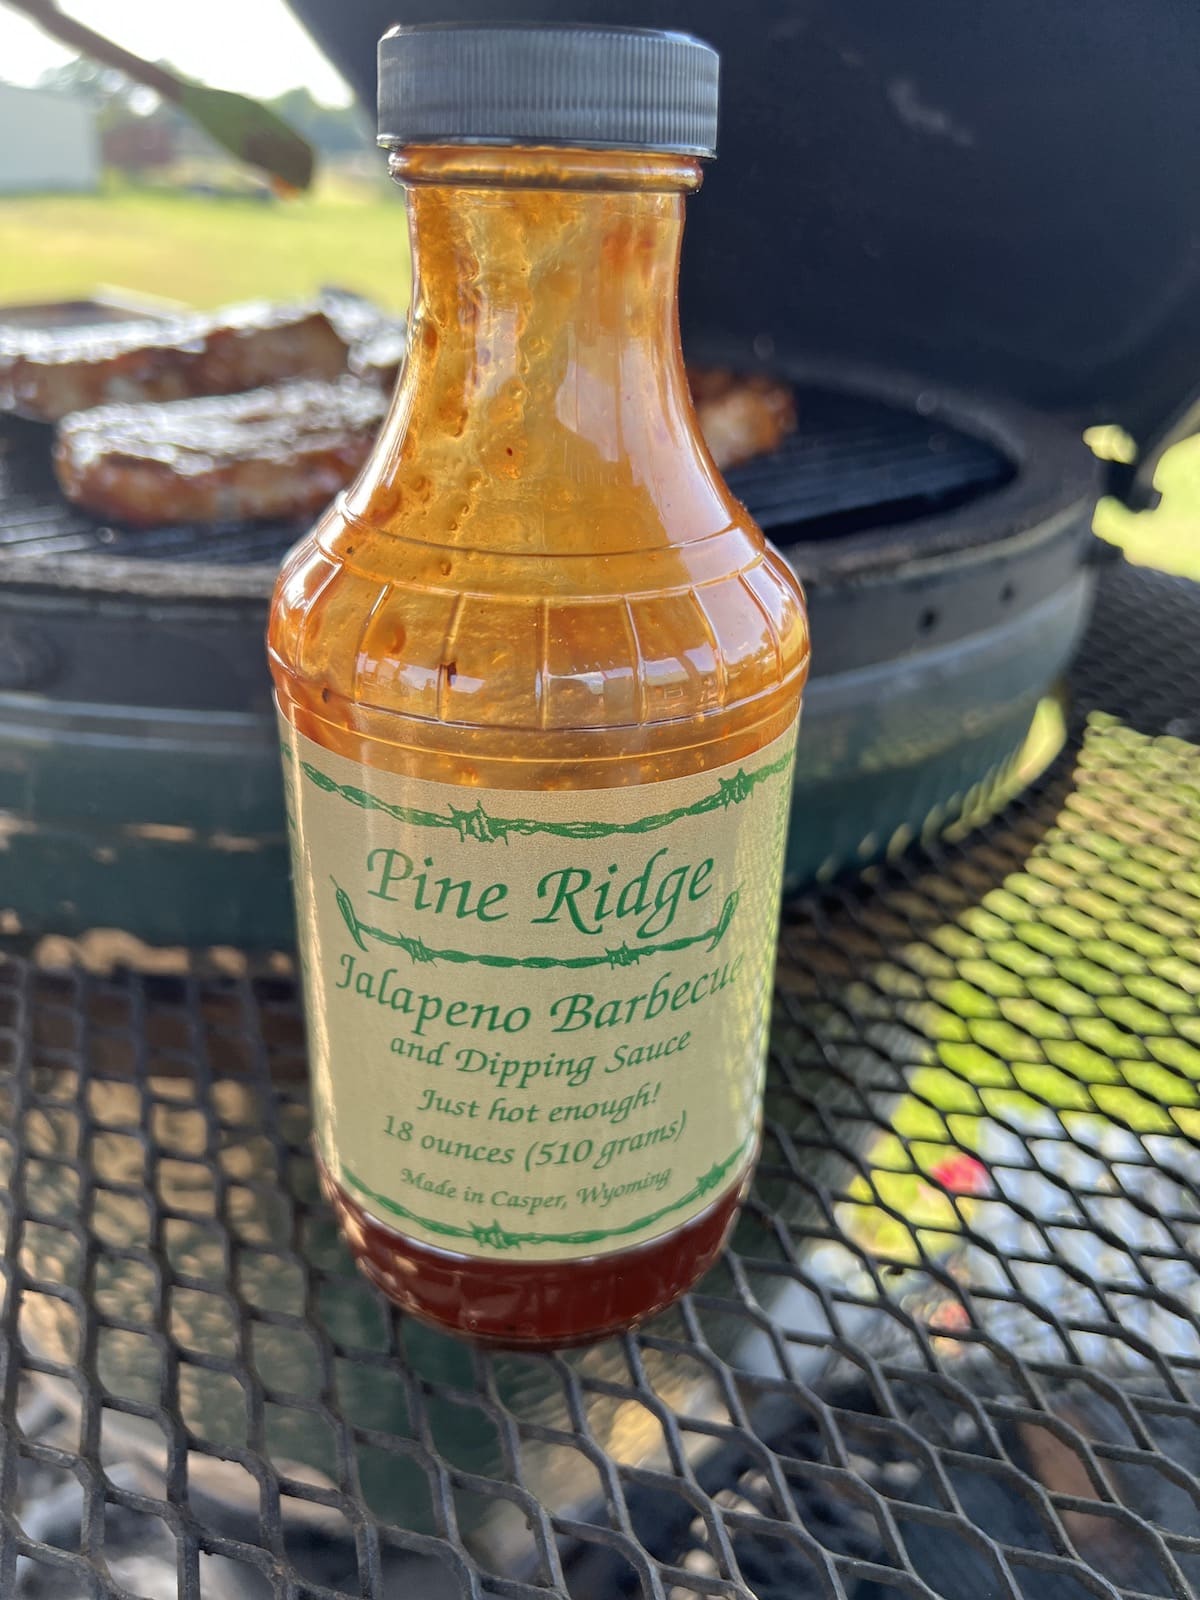 Pine Ridge Jalapeno Barbecue and Dipping Sauce bottle.